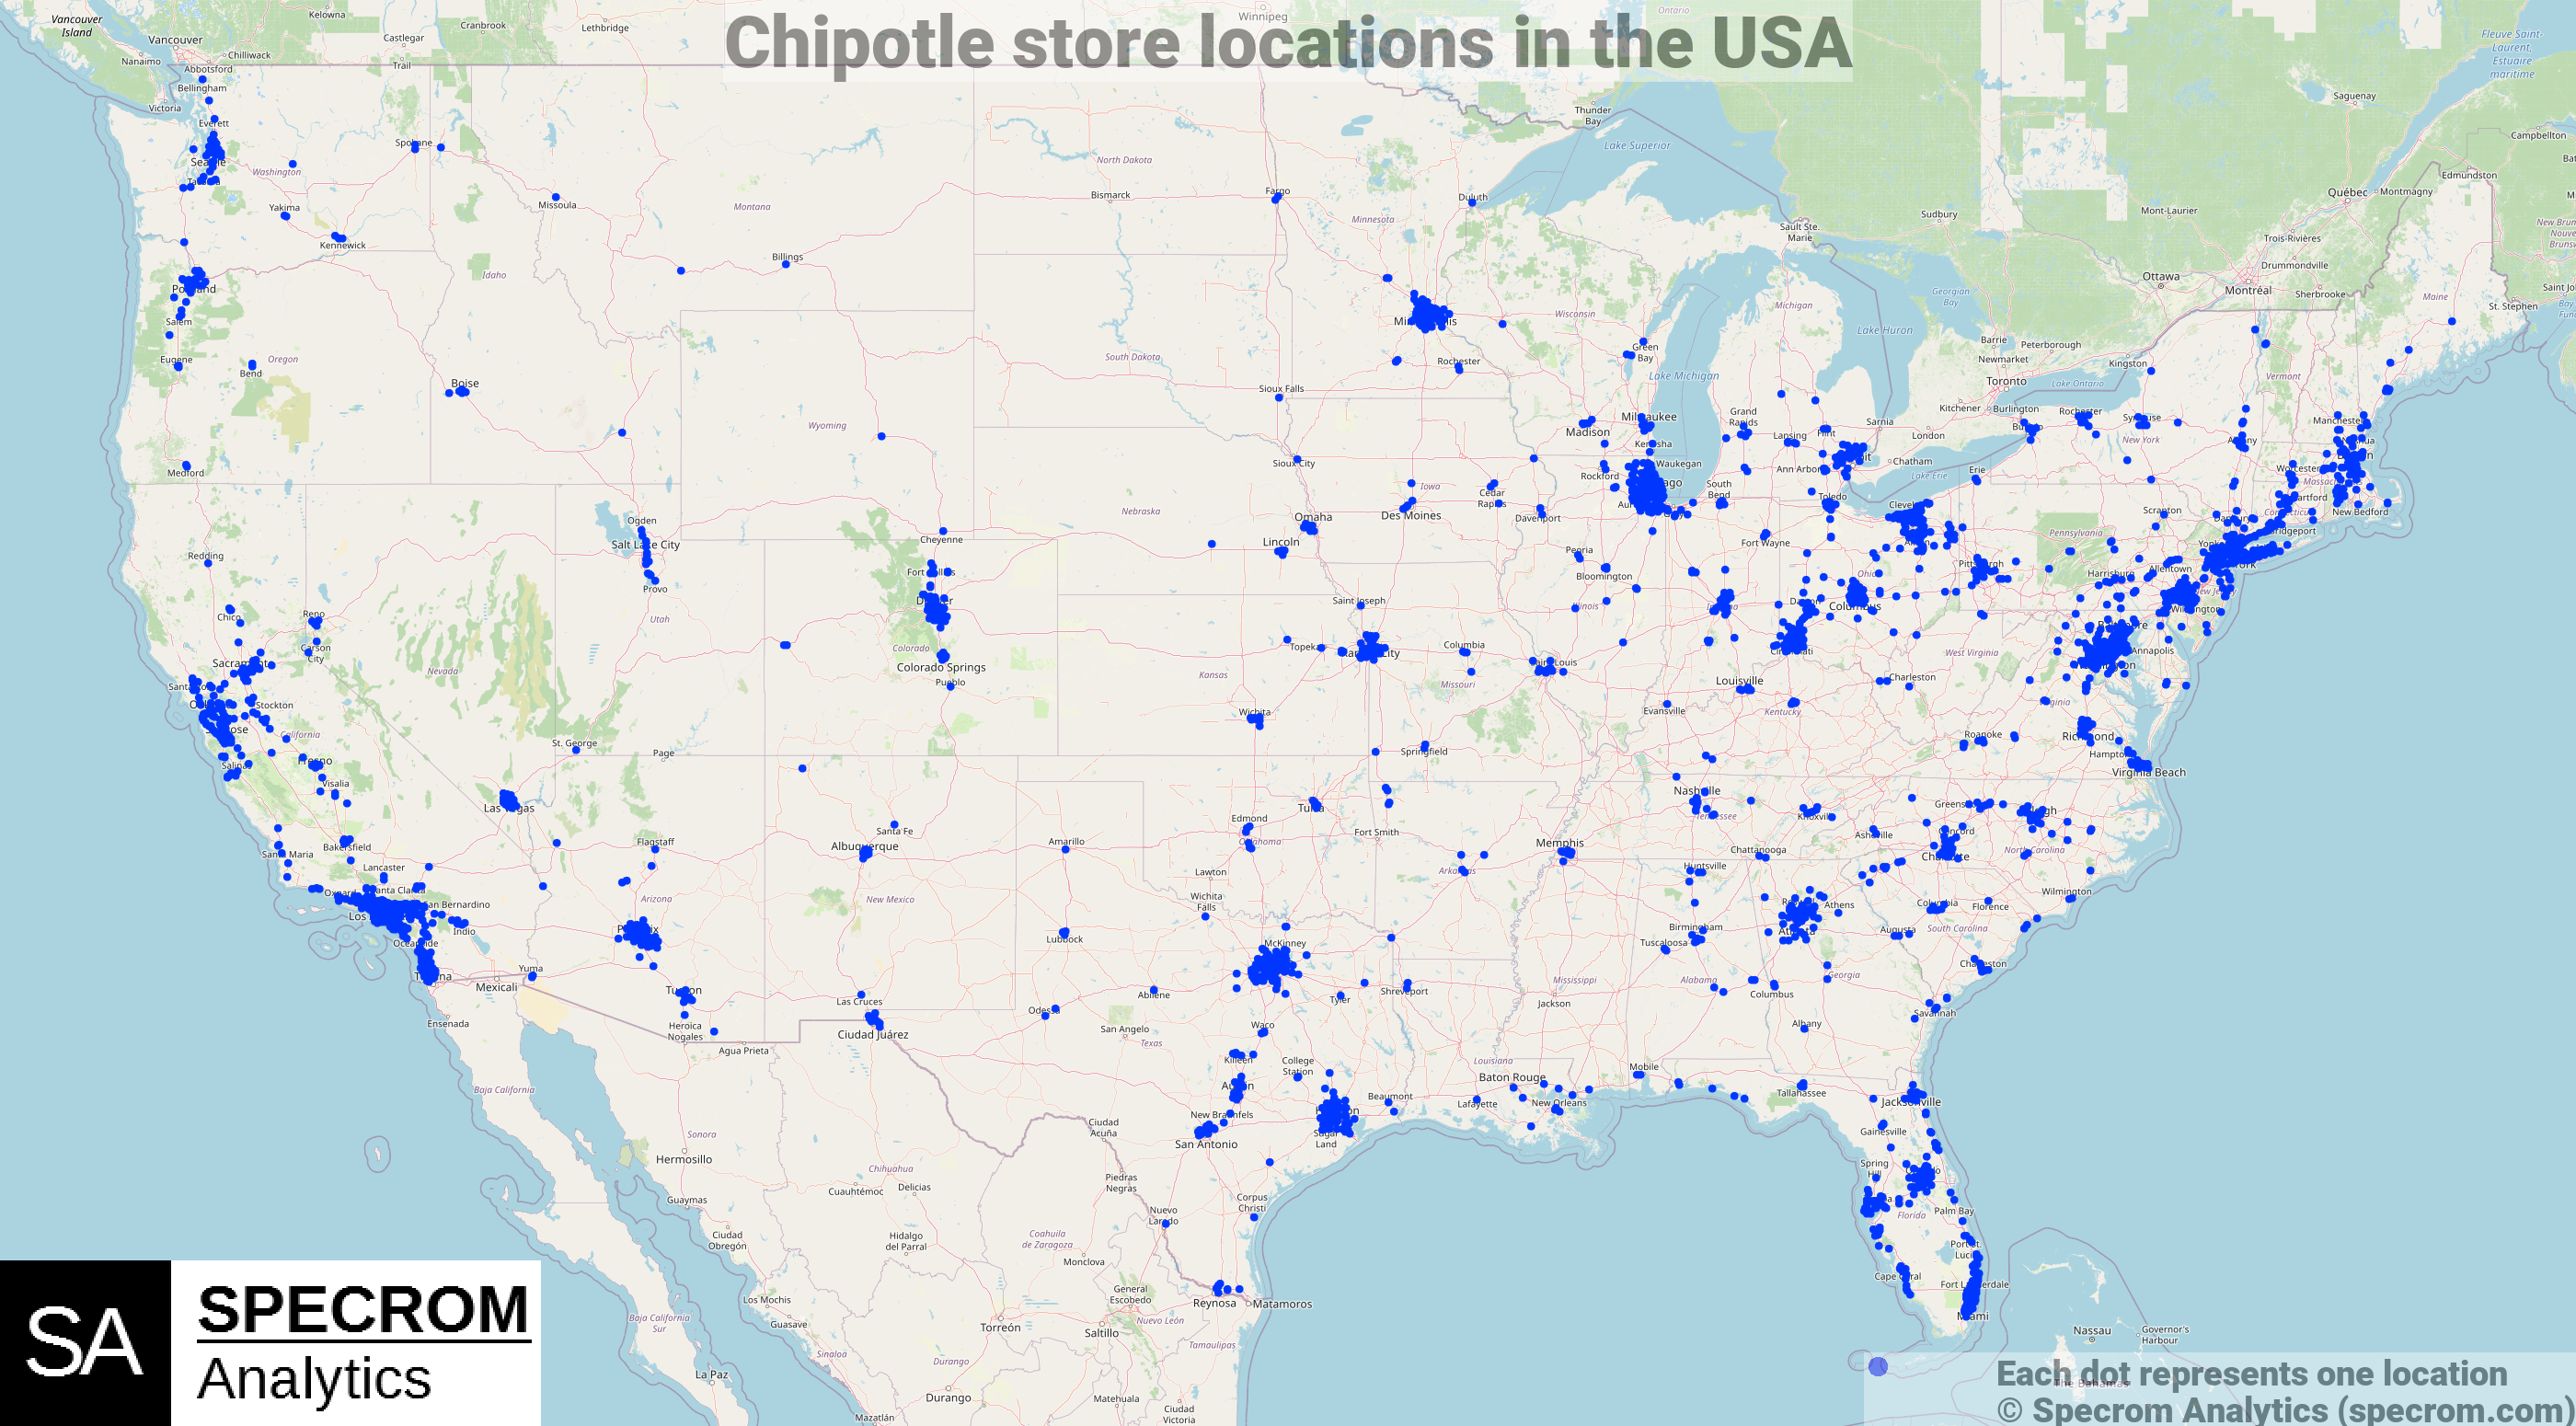 Chipotle store locations in the USA